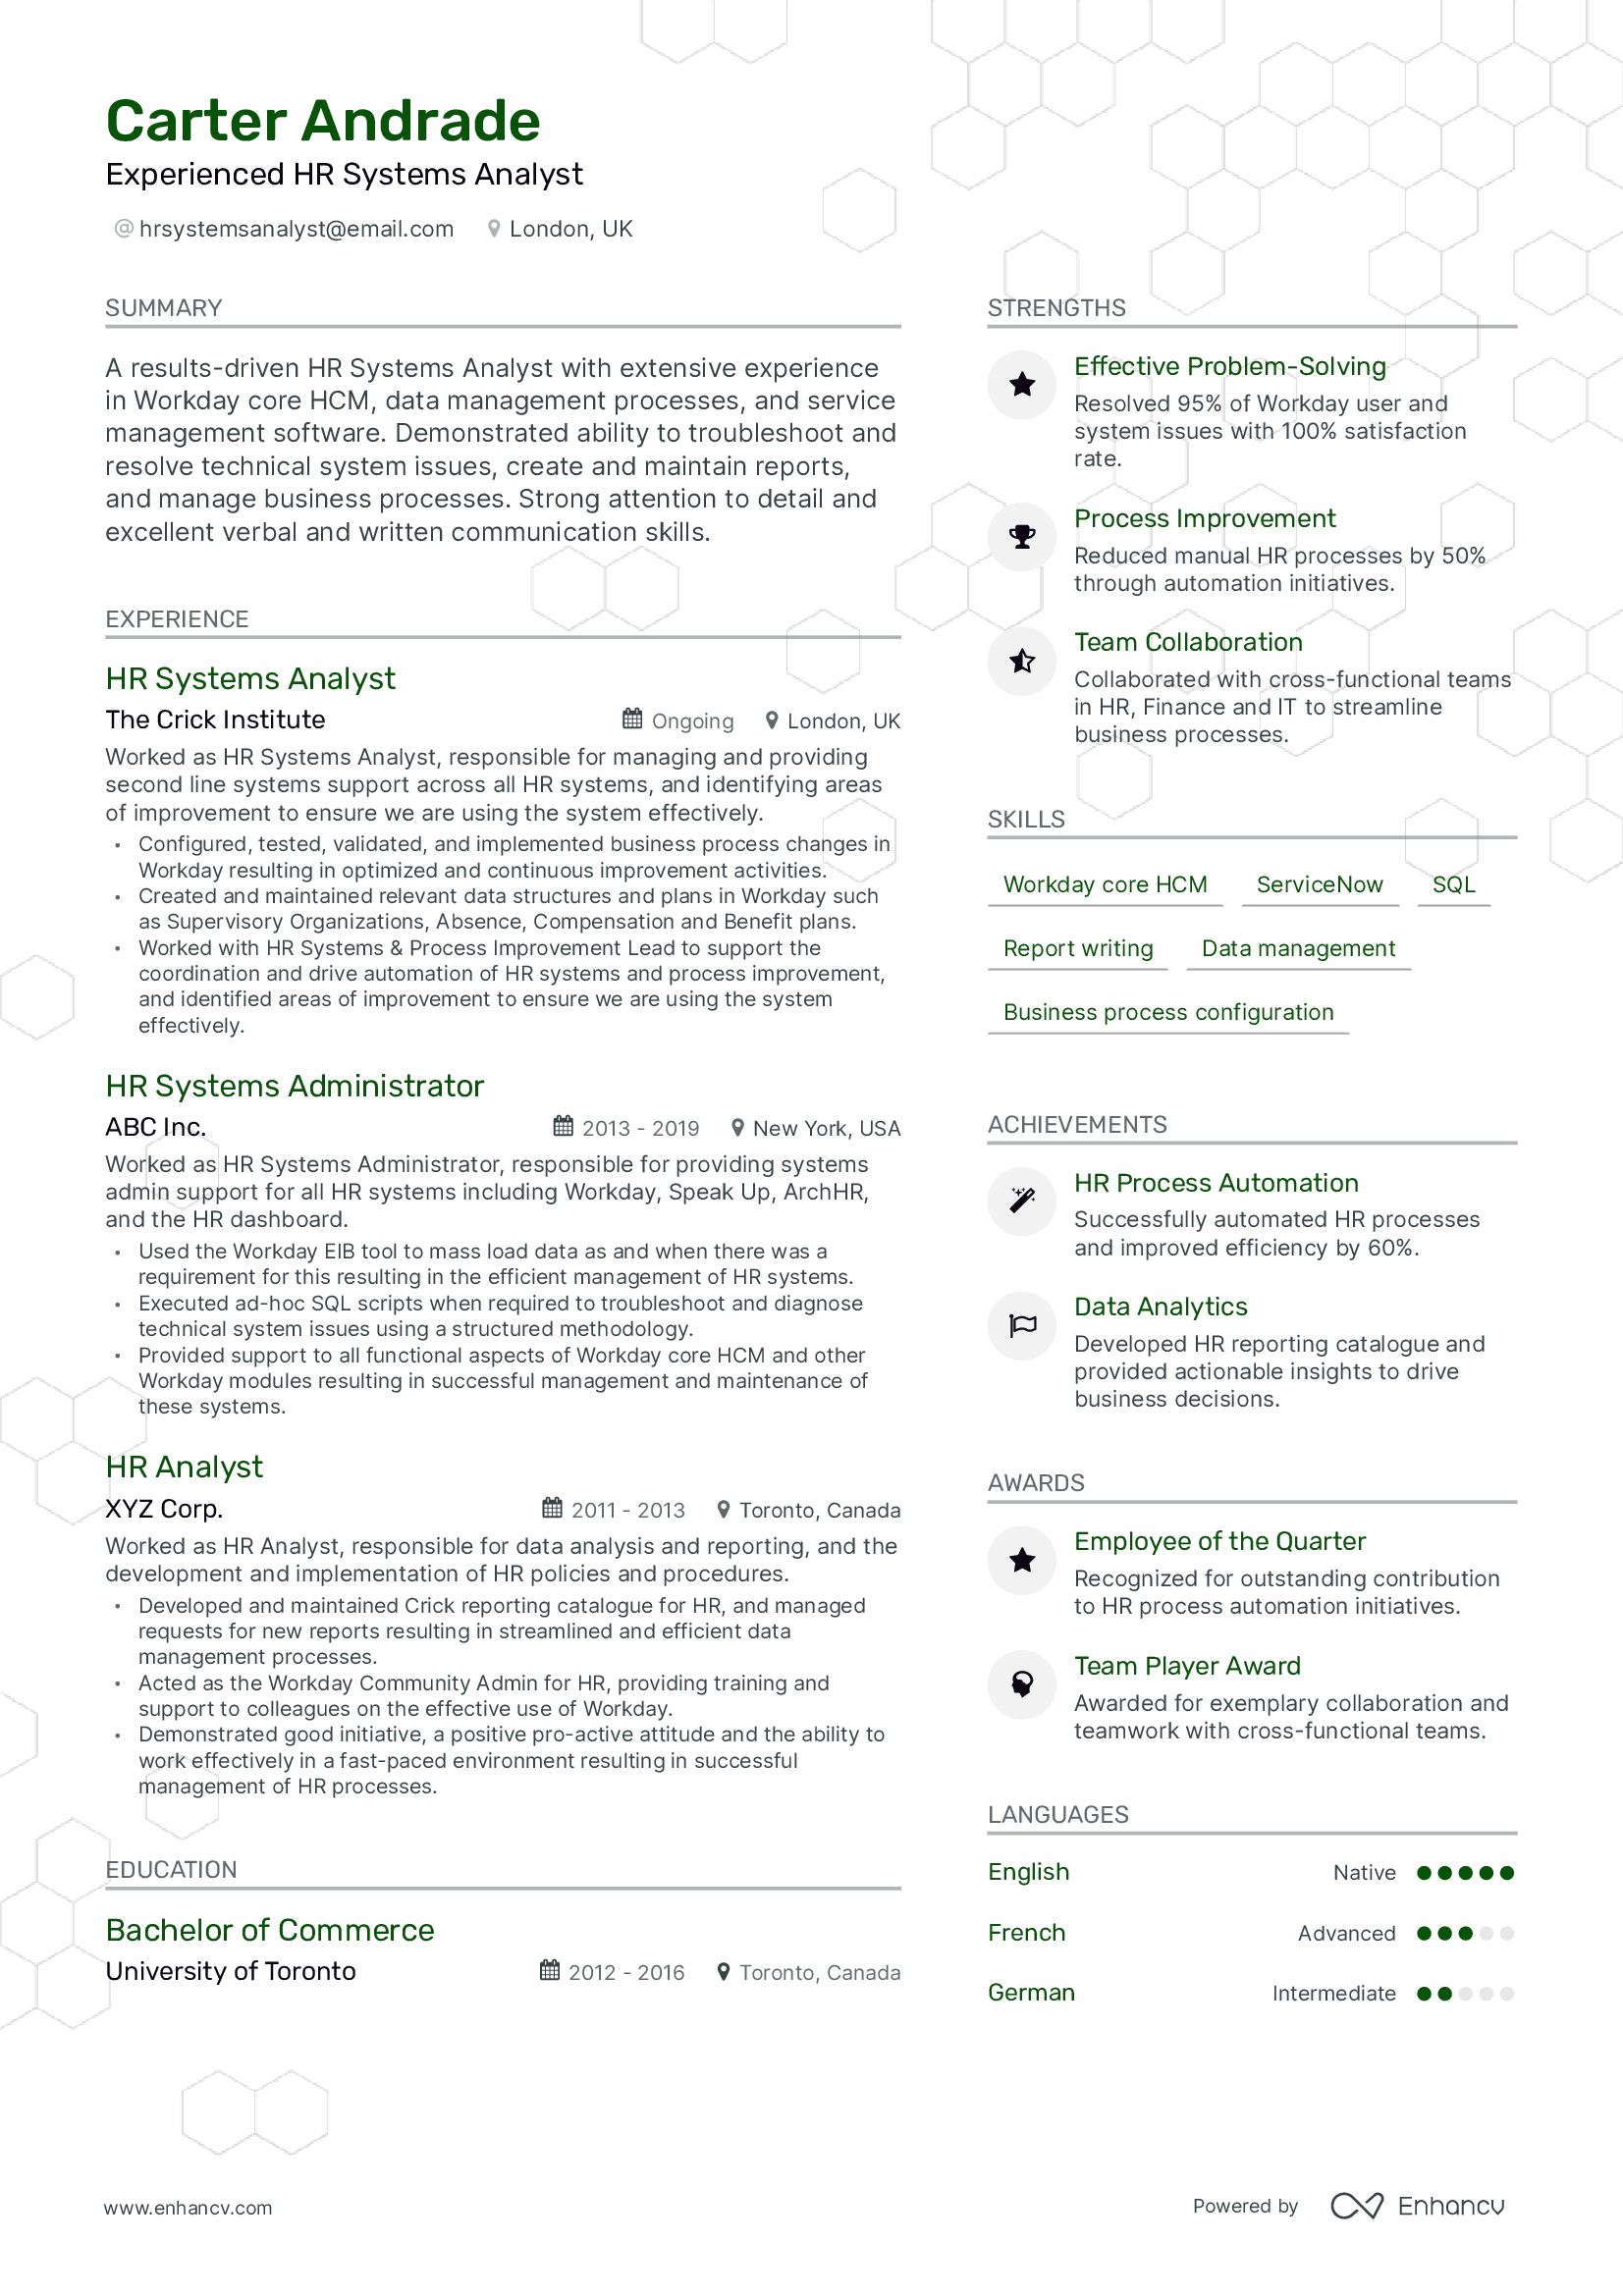 Experienced HR Systems Analyst resume example